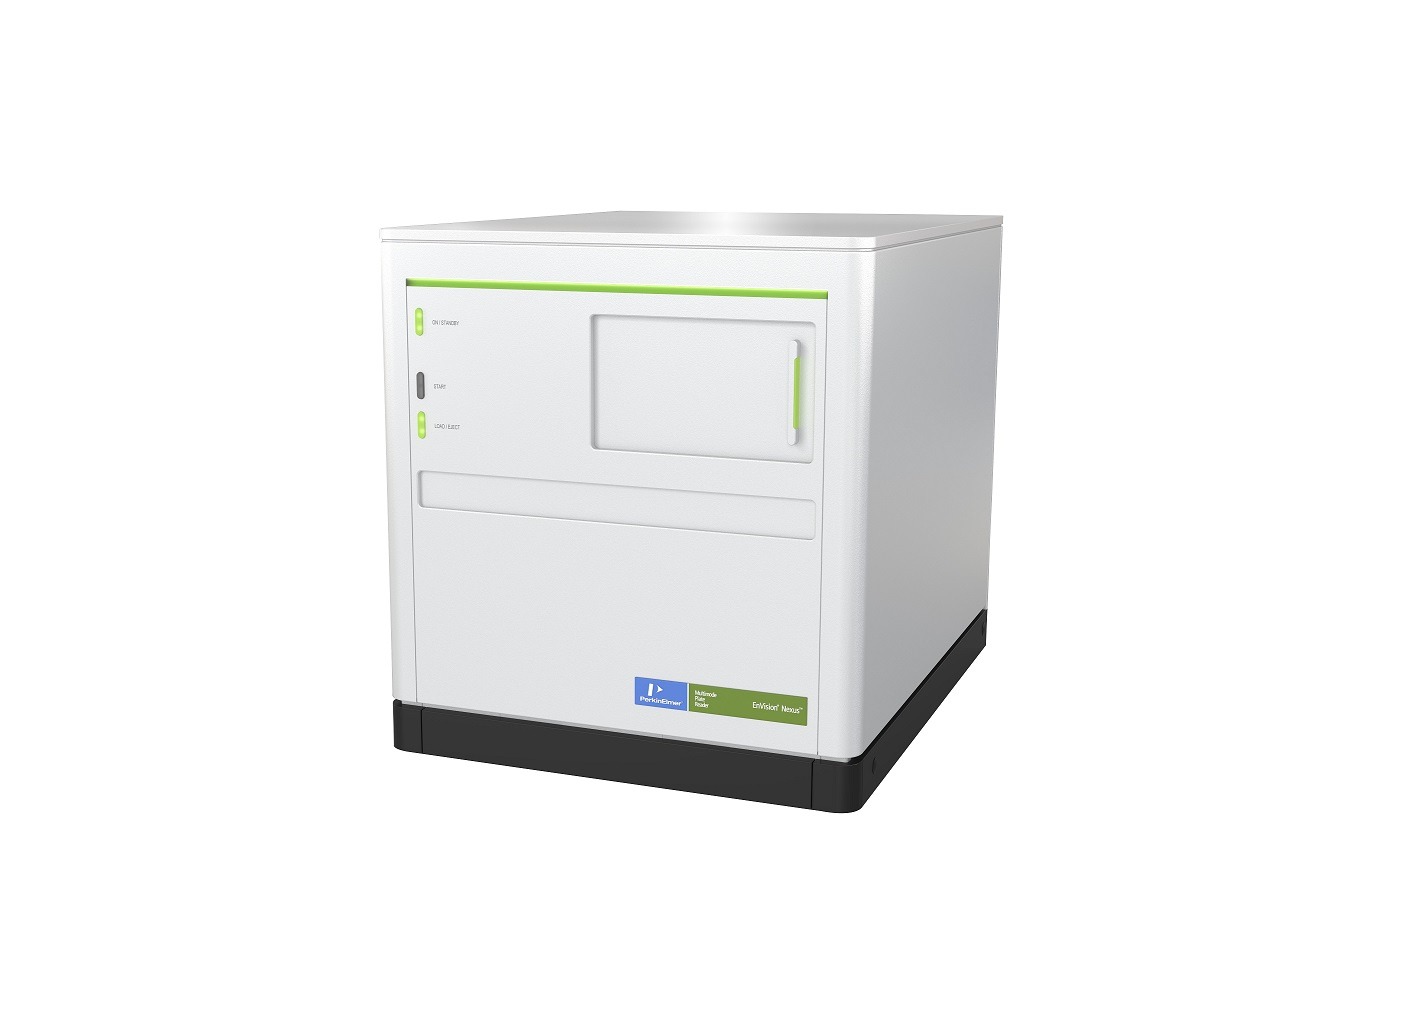 PerkinElmer Launches EnVison Nexus Multimode Plate Reader to Drive Improved Research and Discovery Workflows